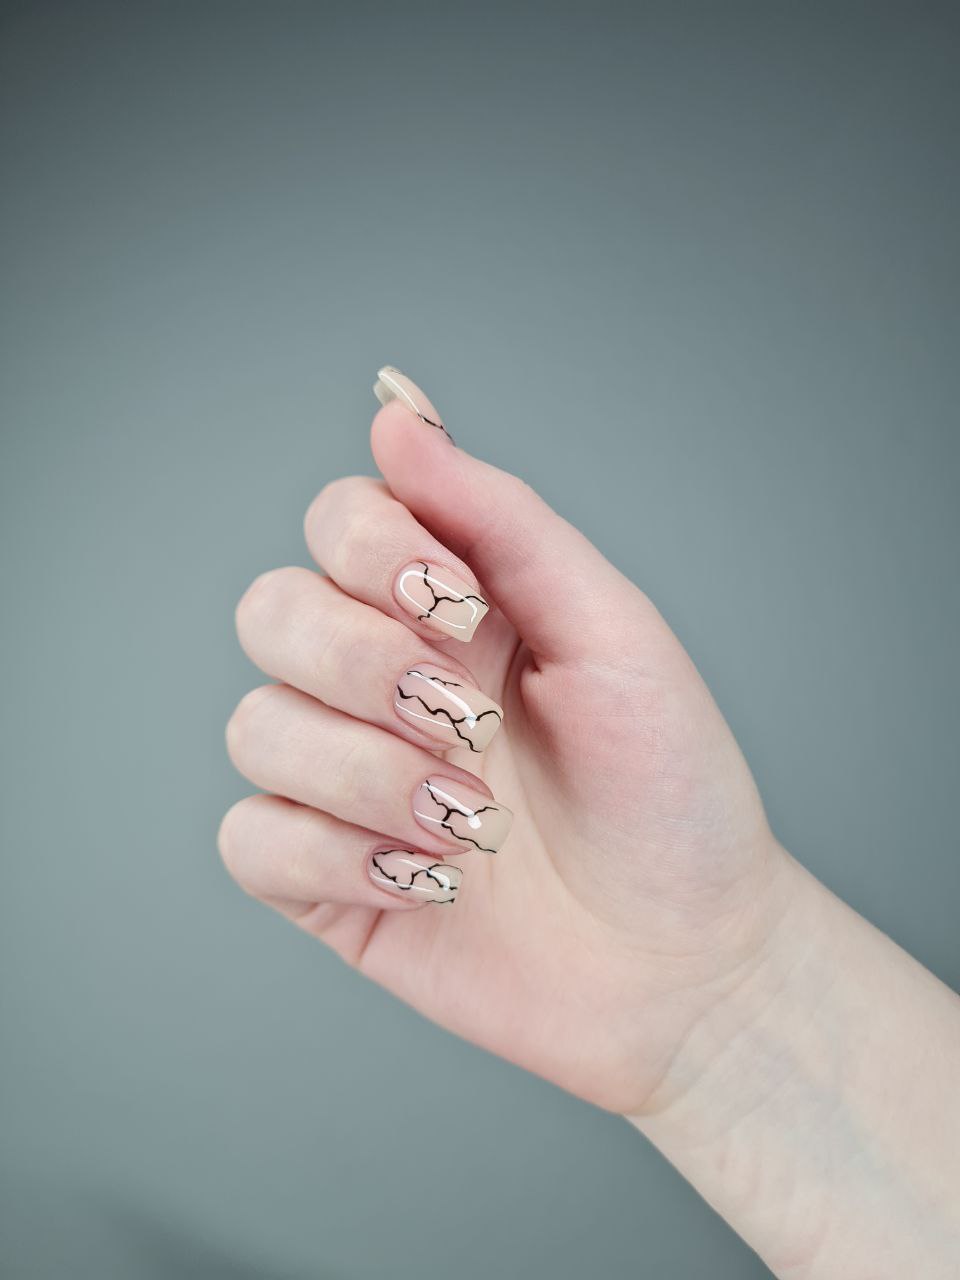 12 Easy Nail Designs - Simple Nail Art Ideas You Can Do Yourself